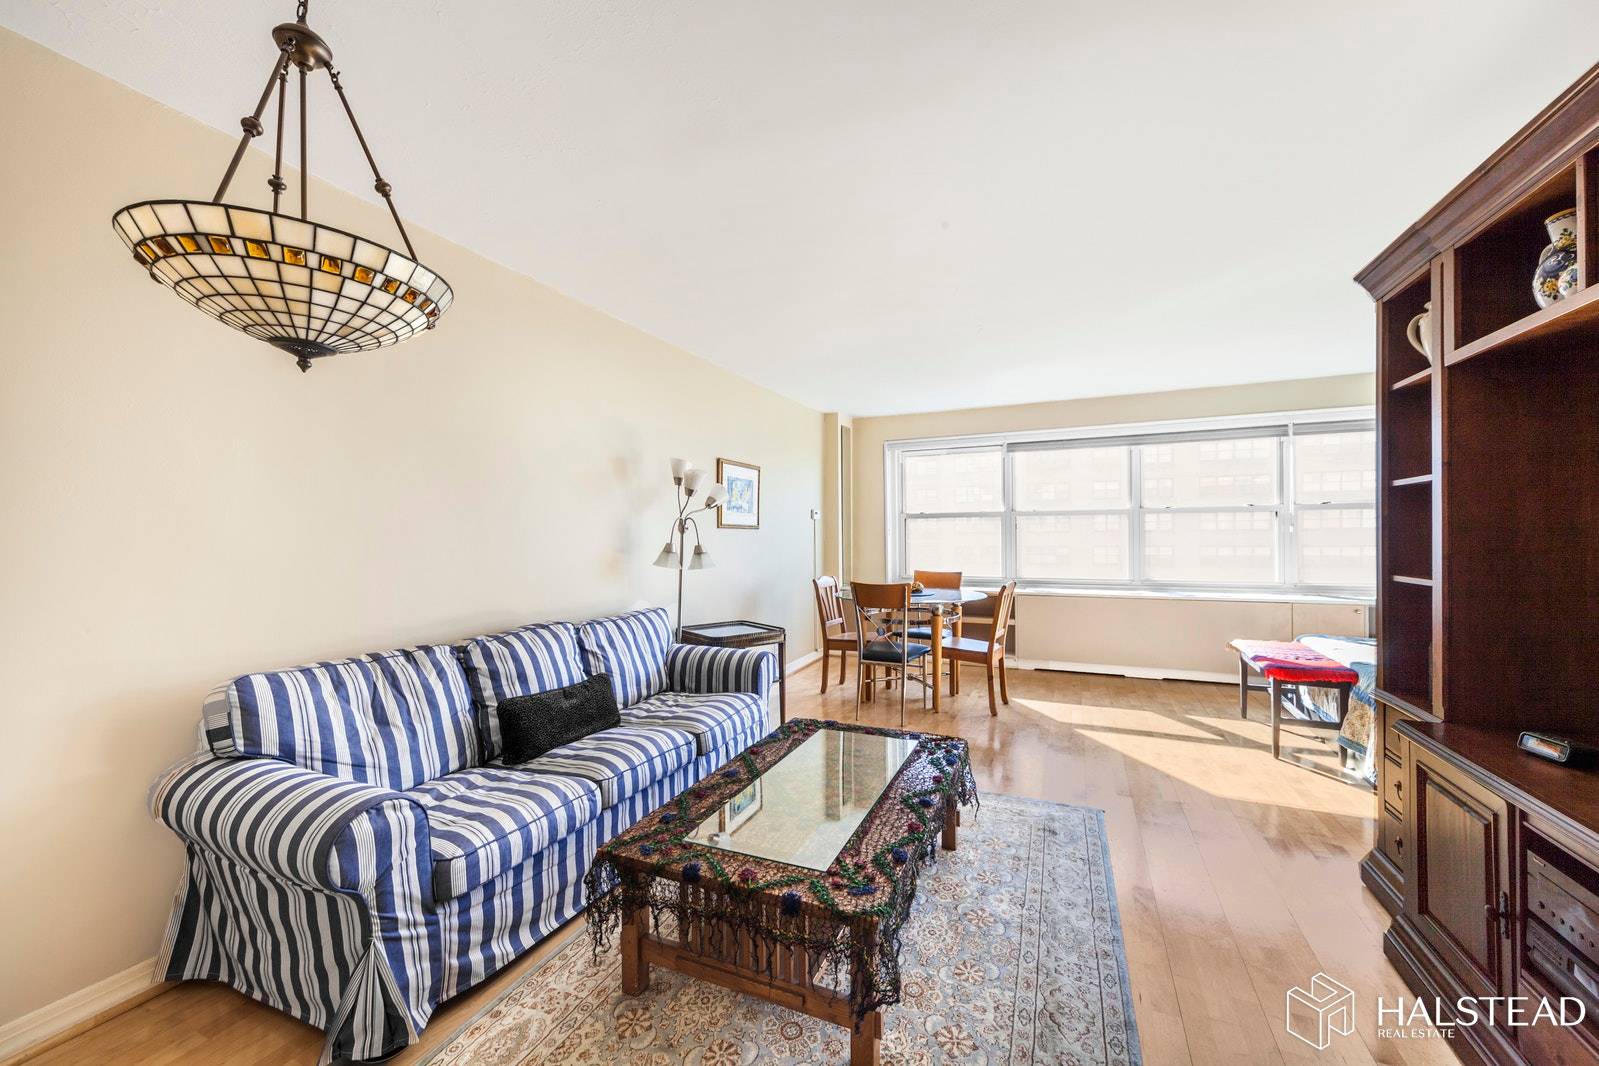 150 West End Avenue Apartment 25N Price 575, 000 Beautiful High Floor Sunny Alcove Studio Junior One Bedroom at Lincoln Towers !